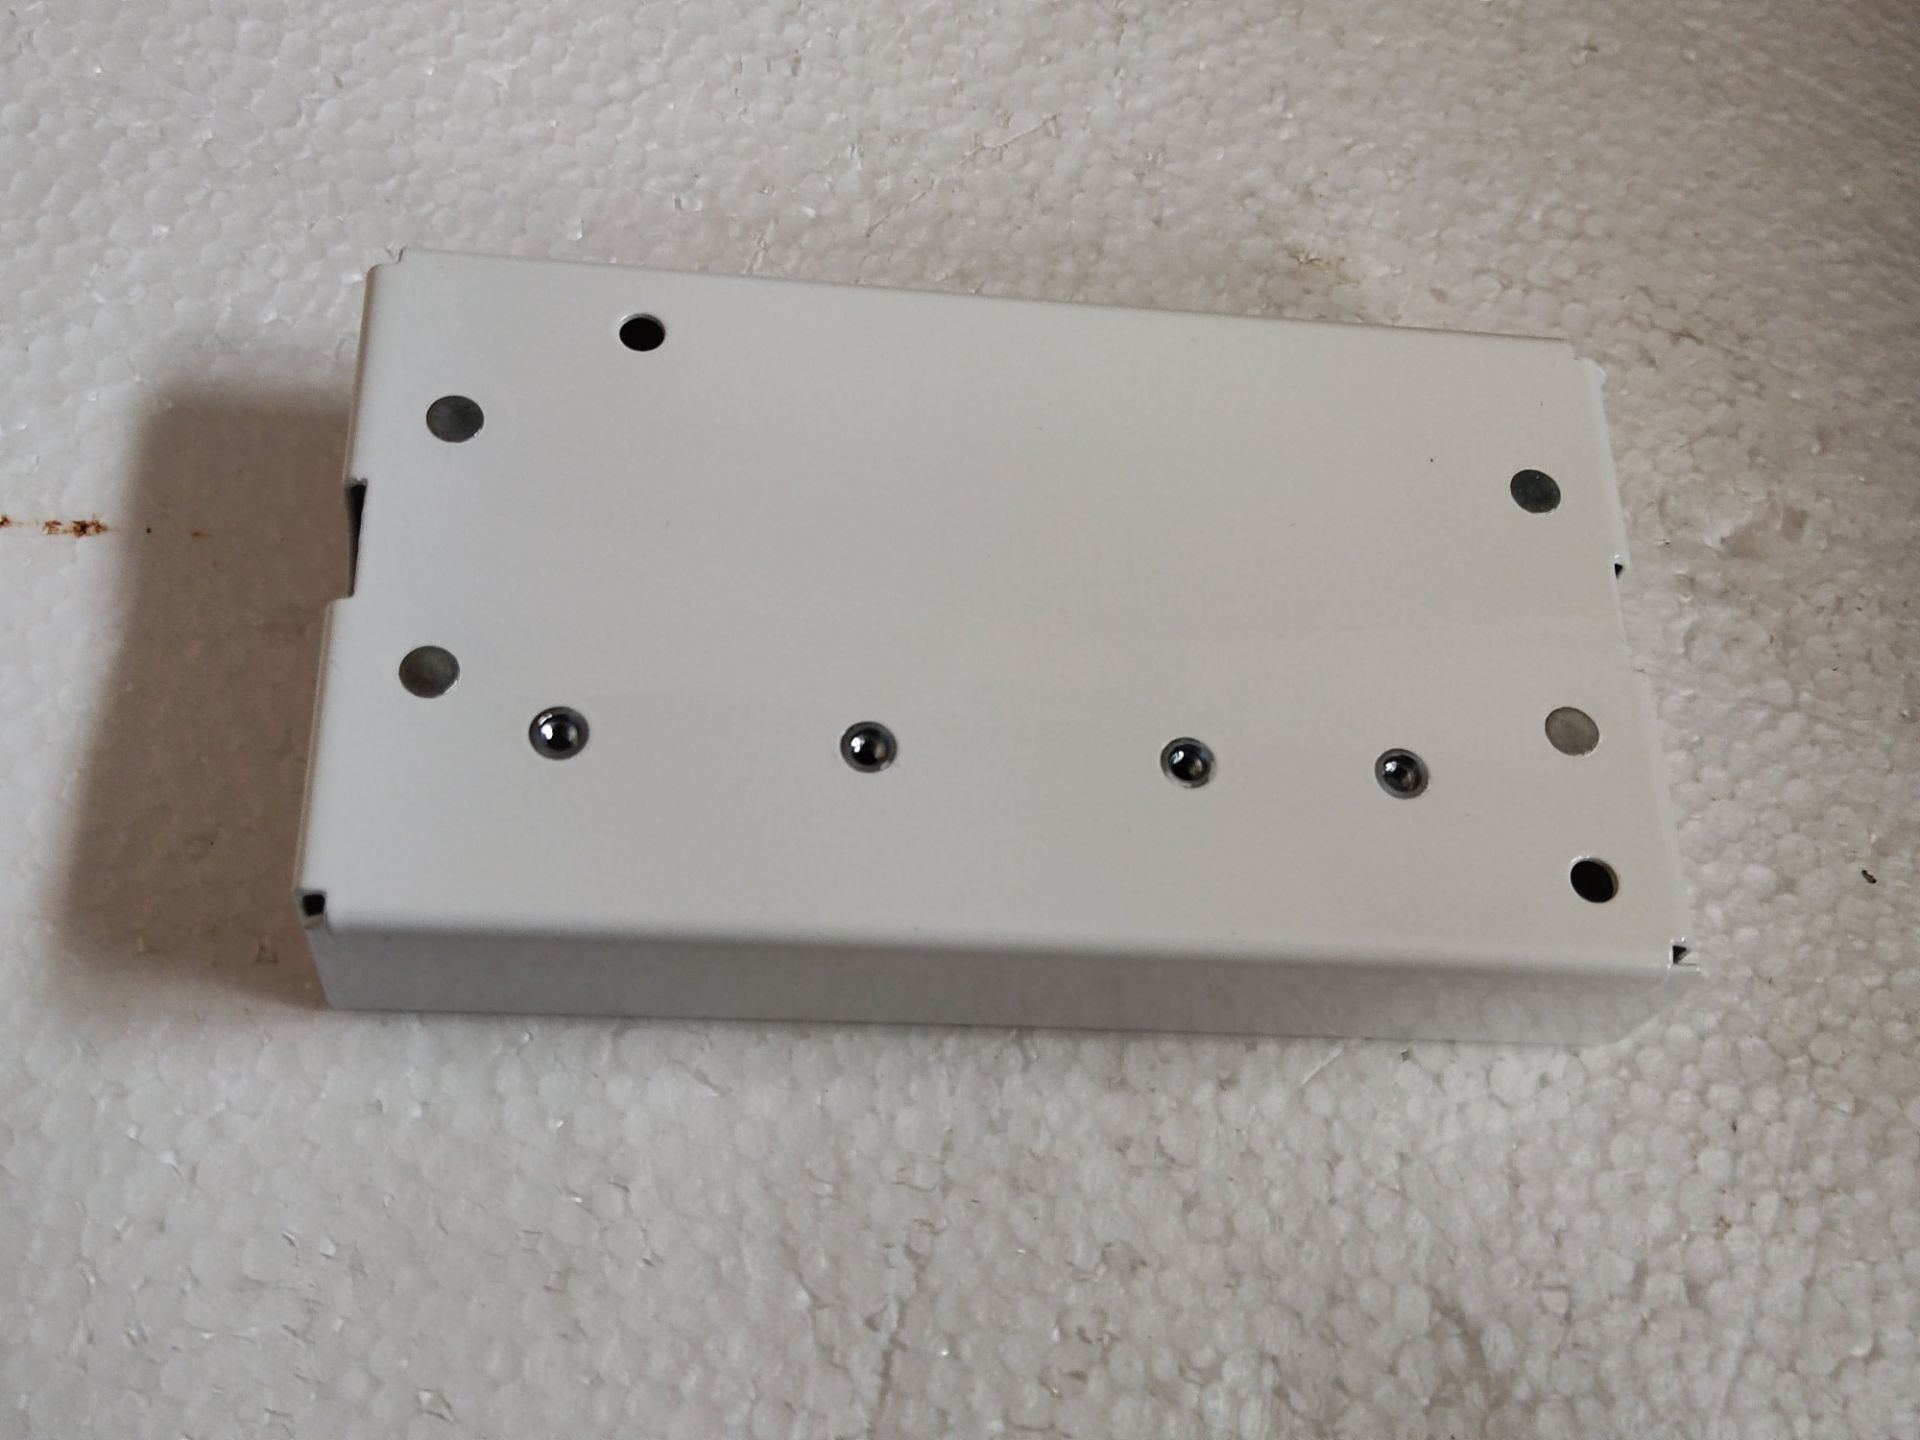 4 Packs of Euro V-Box Heavy Duty Enclosure for GL/GLX, Wall and Ceiling Mount. - Image 3 of 3